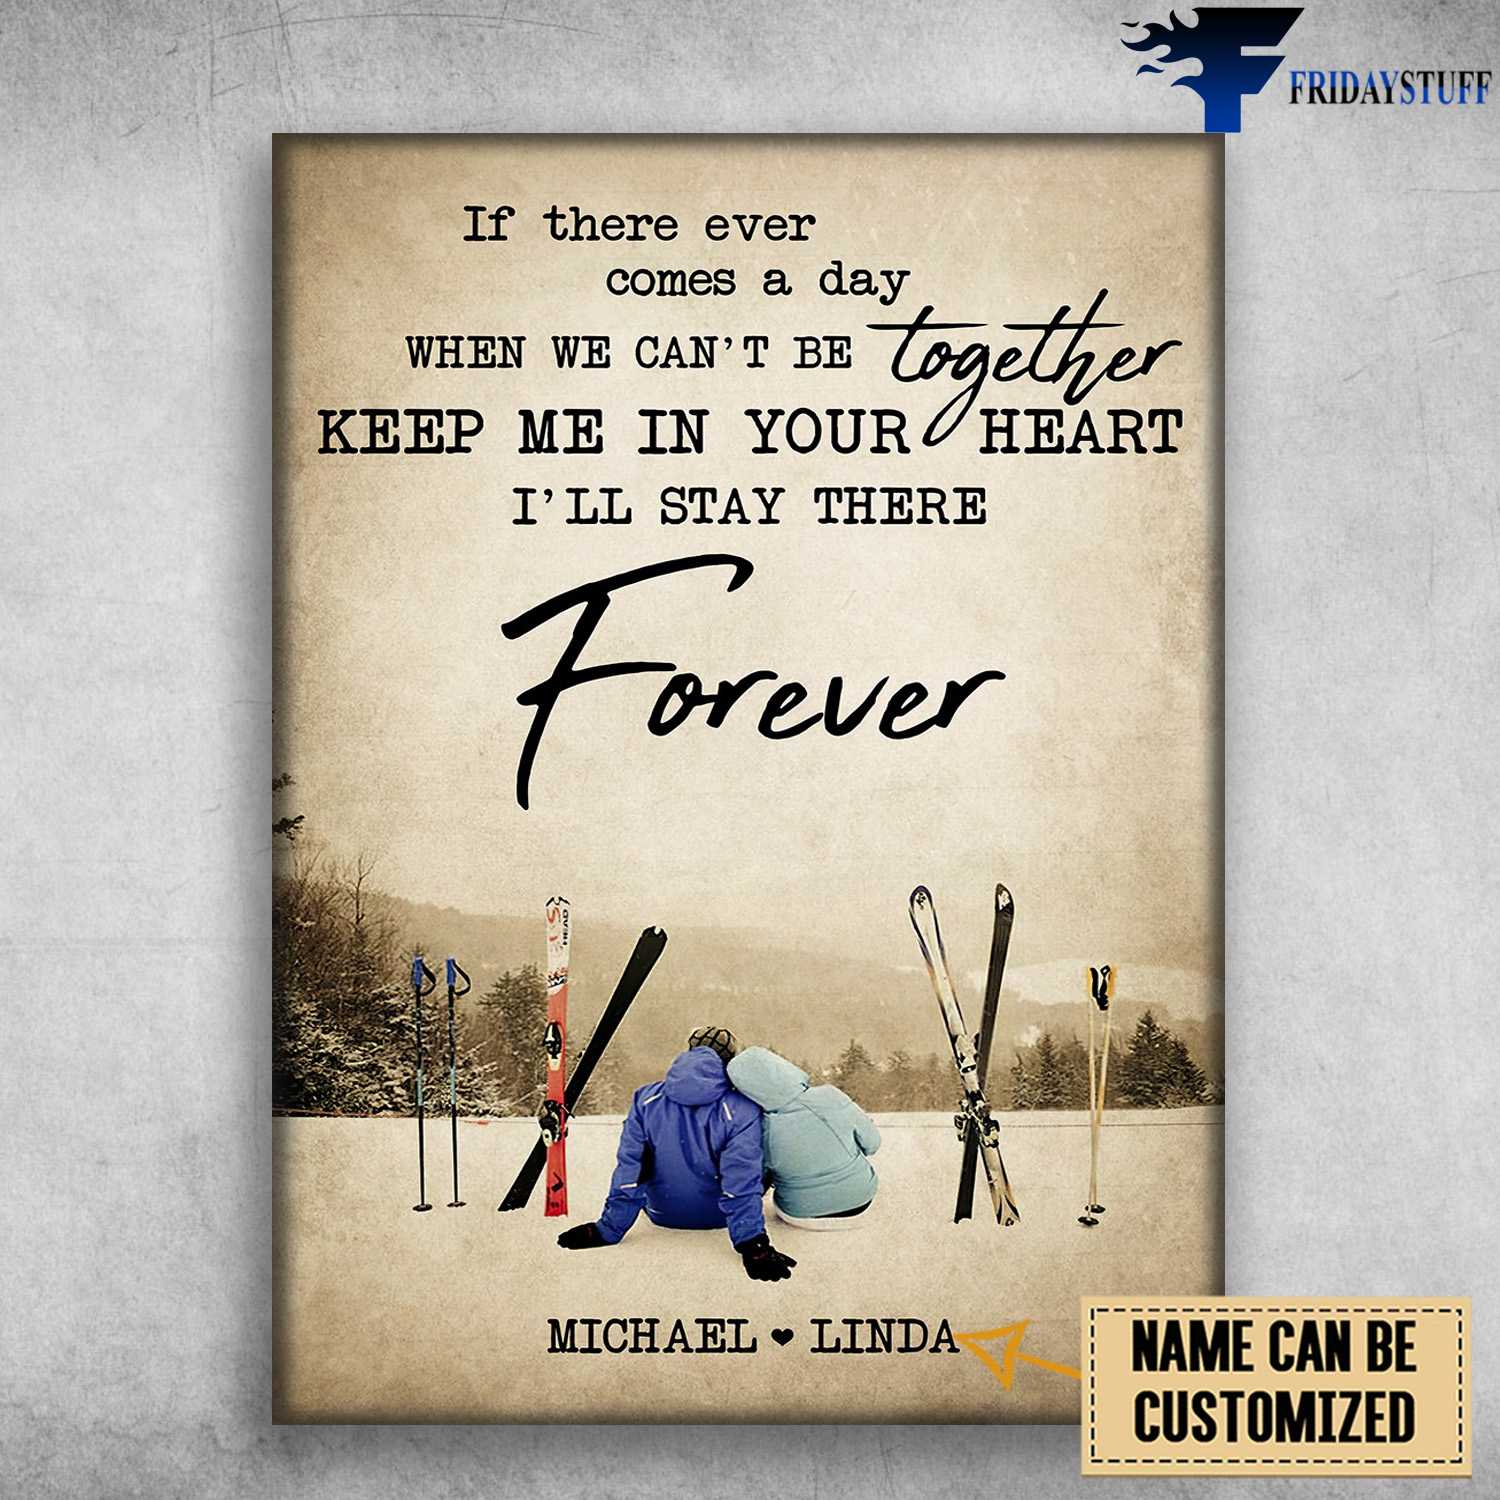 Ski Lift, Skiing Couple - If There Ever Comes A Day, When We Can't Be Together, Keep The Can't Be Together, Keep Me In Your Heart, I'll Stay There Forever